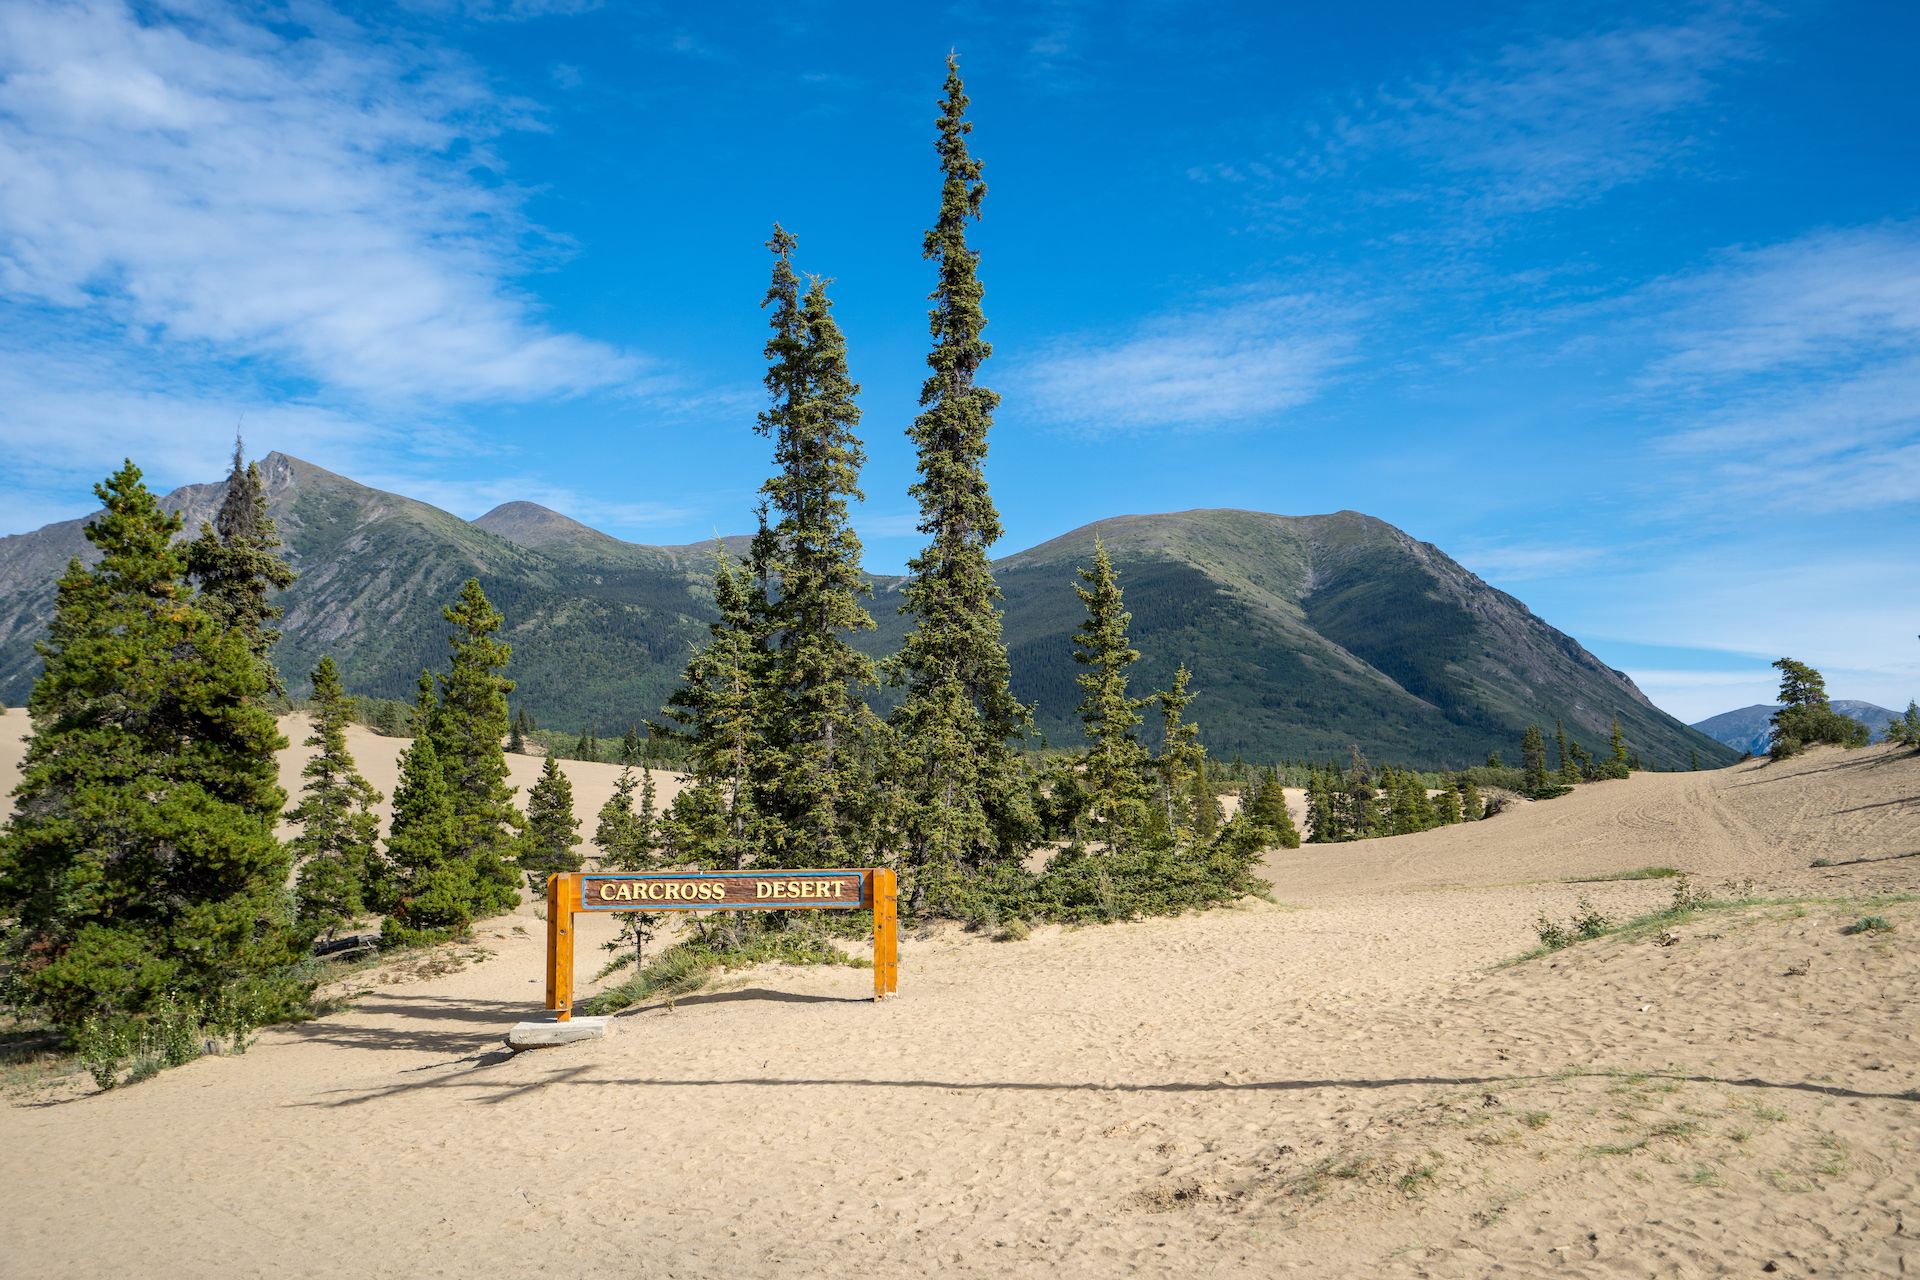 We stopped in the Carcross “desert” on our way back to Whitehorse. Fun fact: Carcross got its name from “Caribou Crossing.”